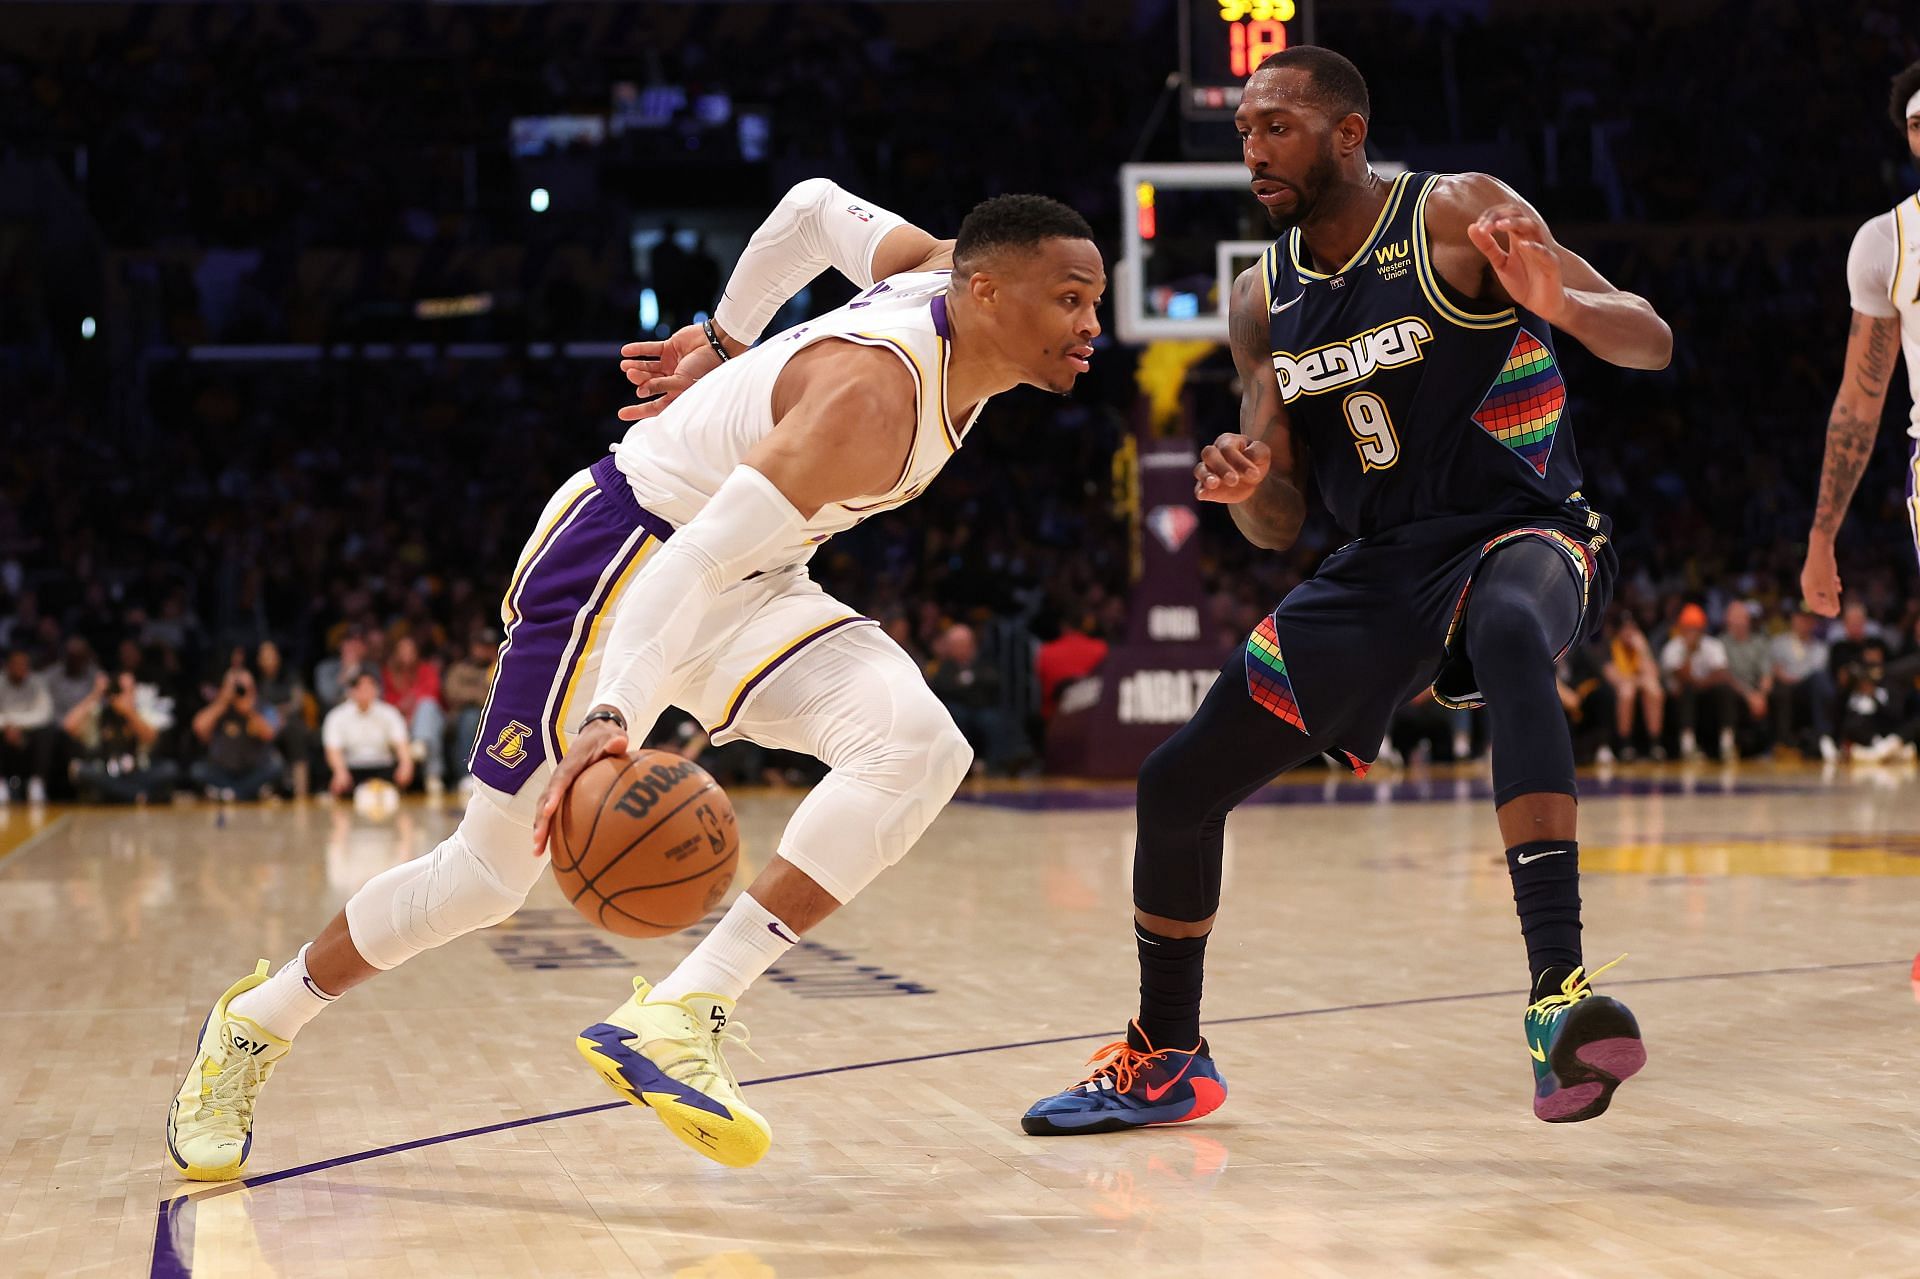 Russell Westbrook #0 of the Los Angeles Lakers dribbles past the defense of Davon Reed #9 of the Denver Nuggets during the second half of a game at Crypto.com Arena on April 03, 2022 in Los Angeles, California.